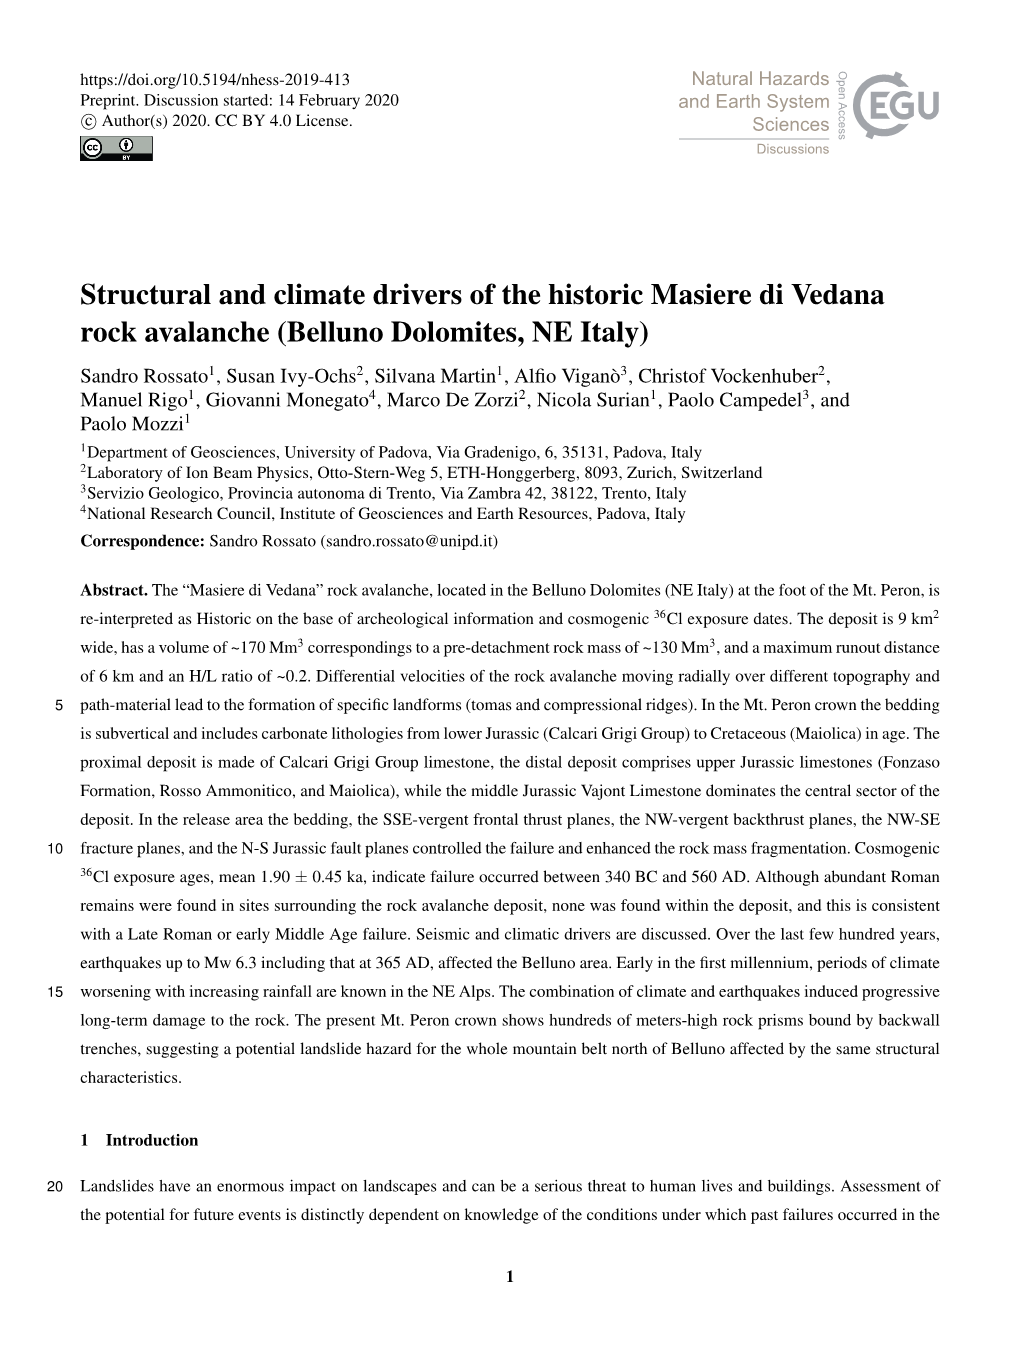 Structural and Climate Drivers of the Historic Masiere Di Vedana Rock